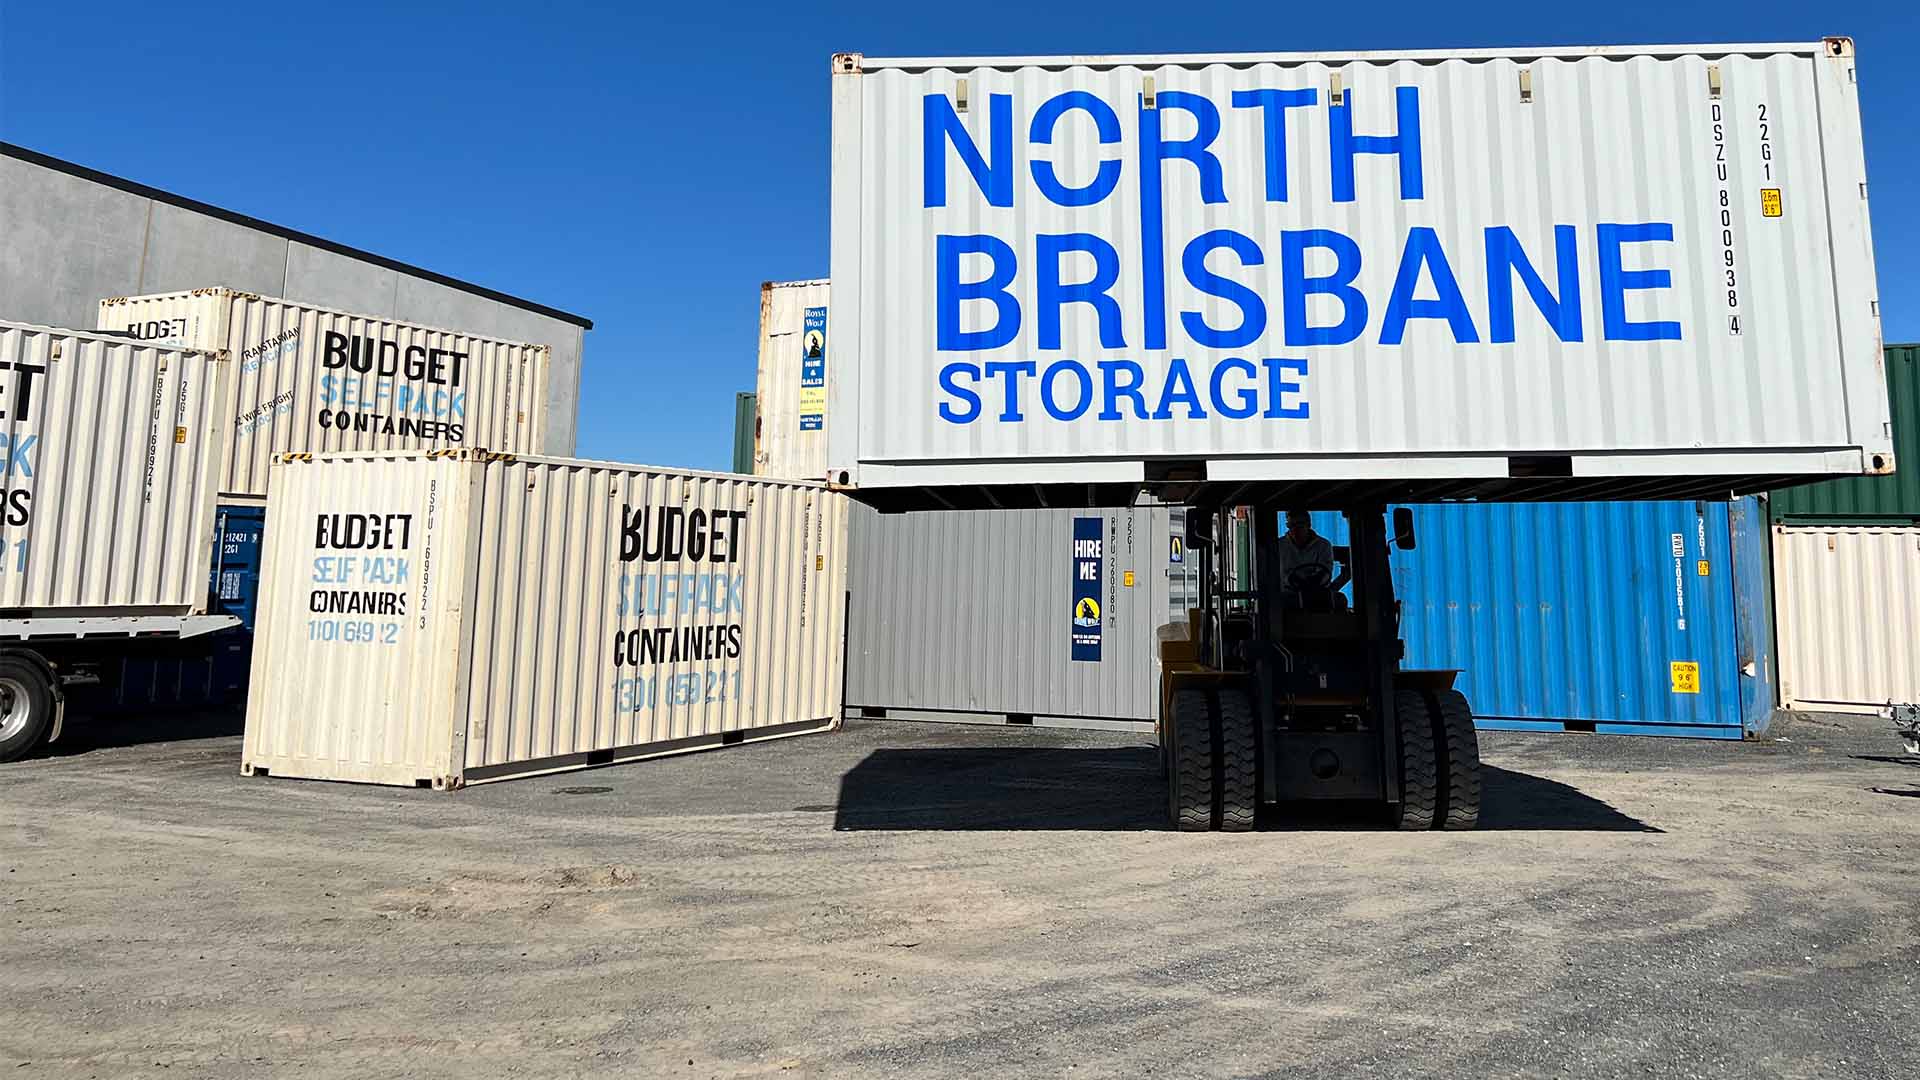 North brisbane storage container being moved by forklift